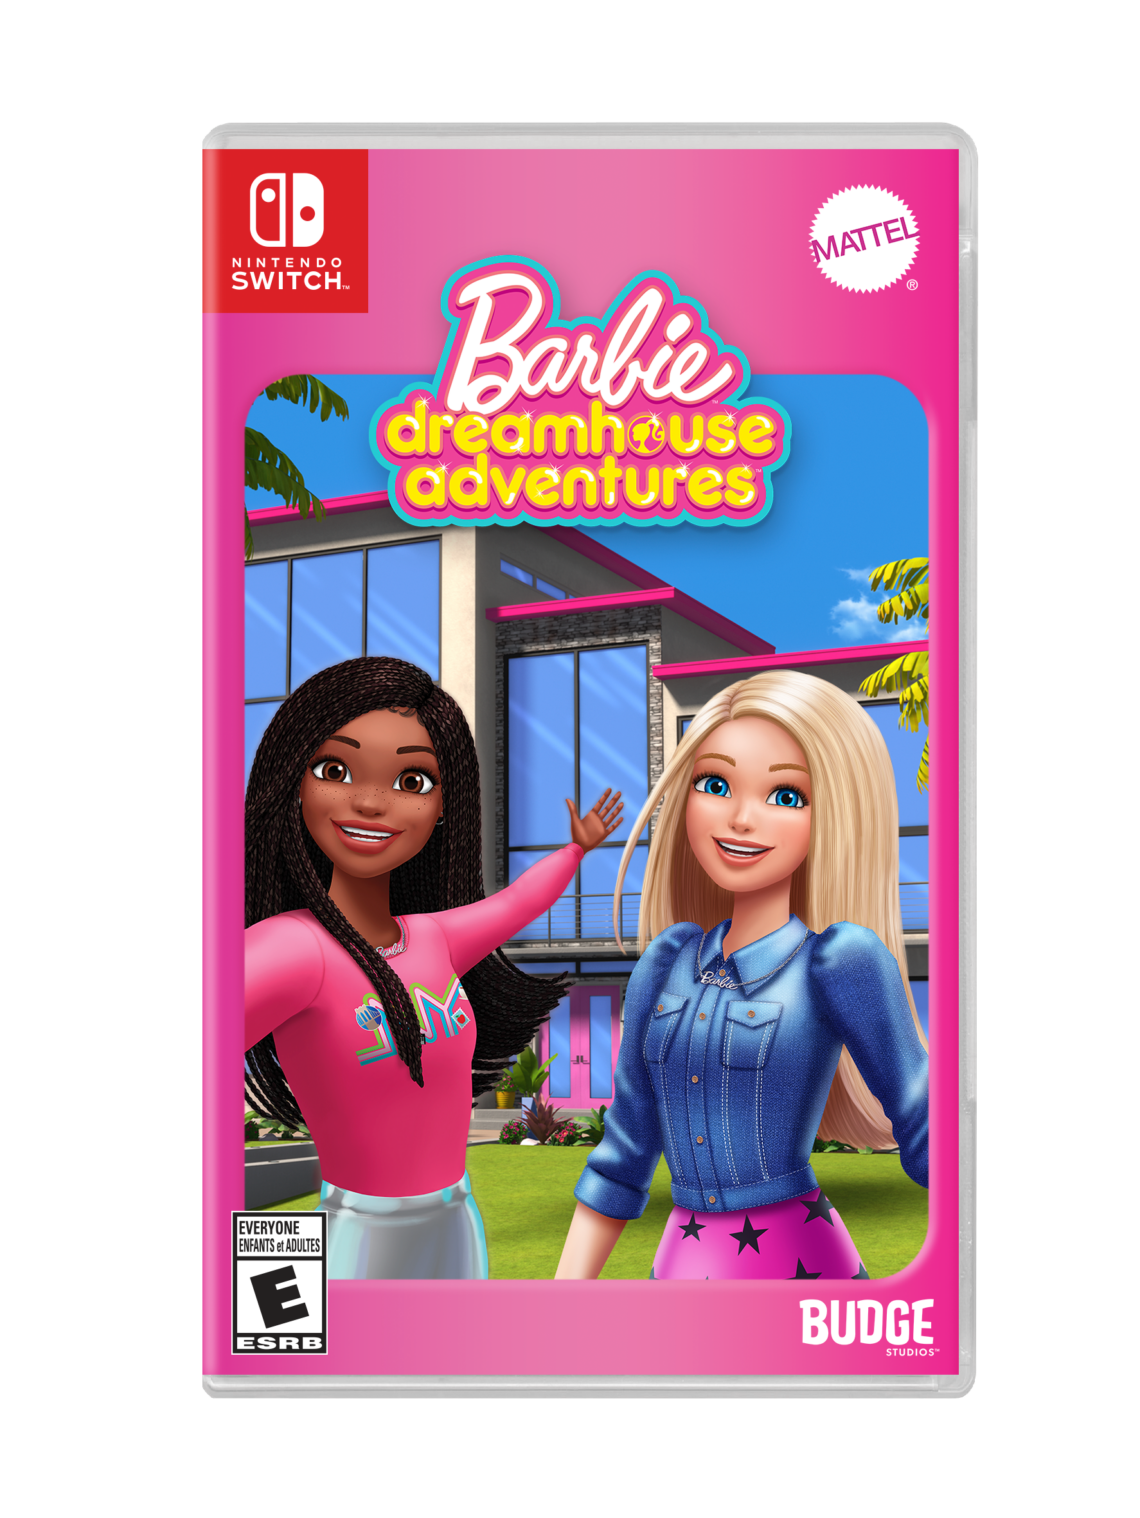 Barbie Dreamhouse Adventures on Nintendo Switch: The Perfect Holiday Gift 31